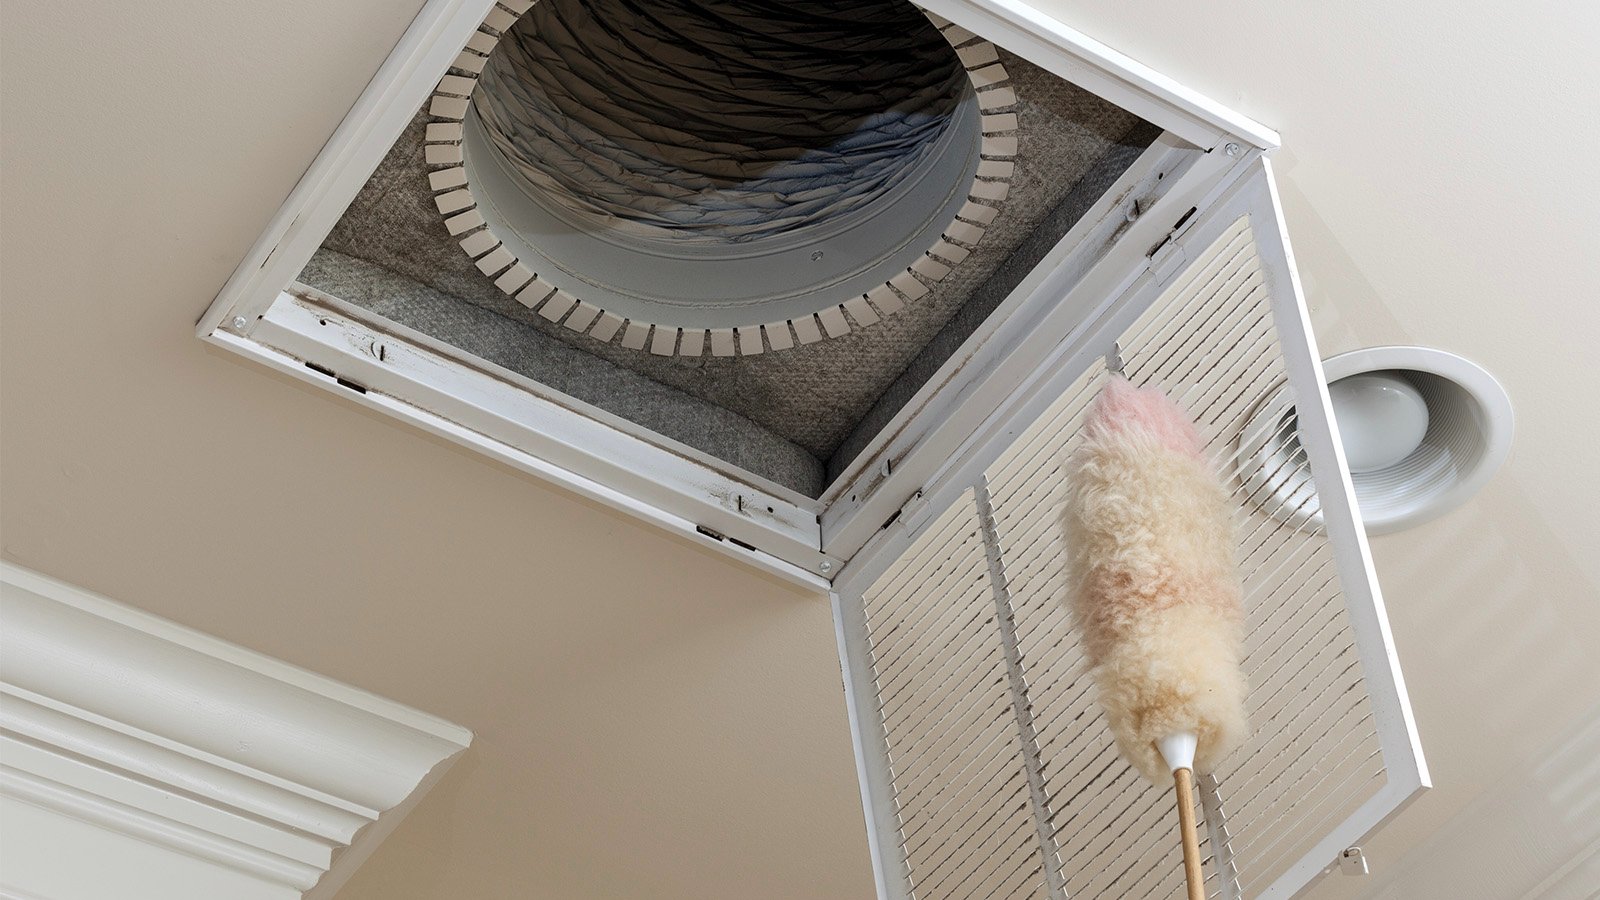 Cleaning a HVAC duct